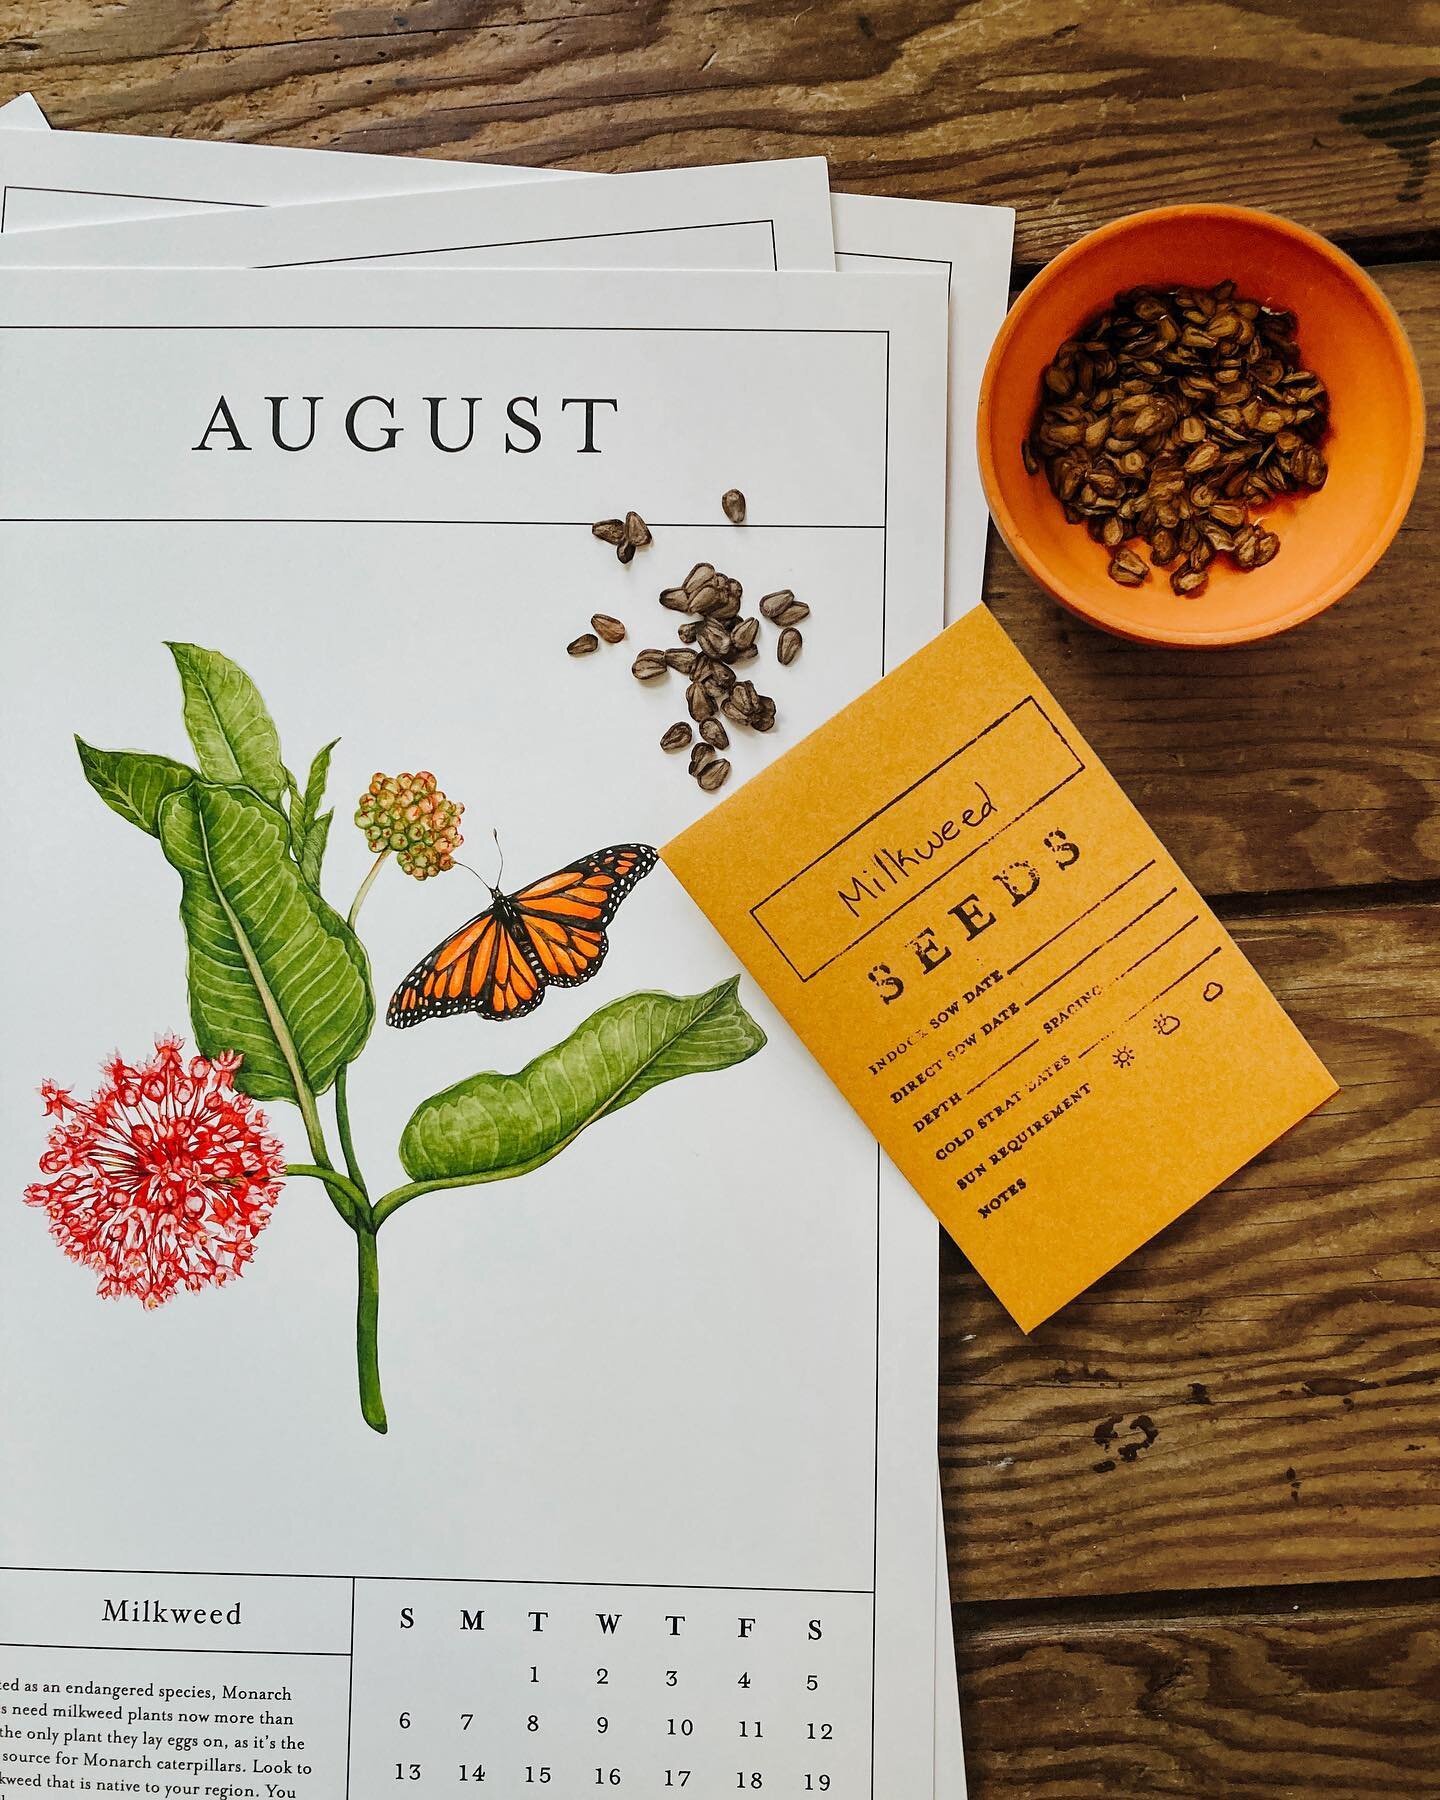 As a small (microscopic?) business owner, it&rsquo;s tough to offer big discounts. But, I can do something the big guys can&rsquo;t: offer a free pack of Milkweed seeds picked from my own garden. This #smallbusinesssaturday (and Sunday) if you purcha